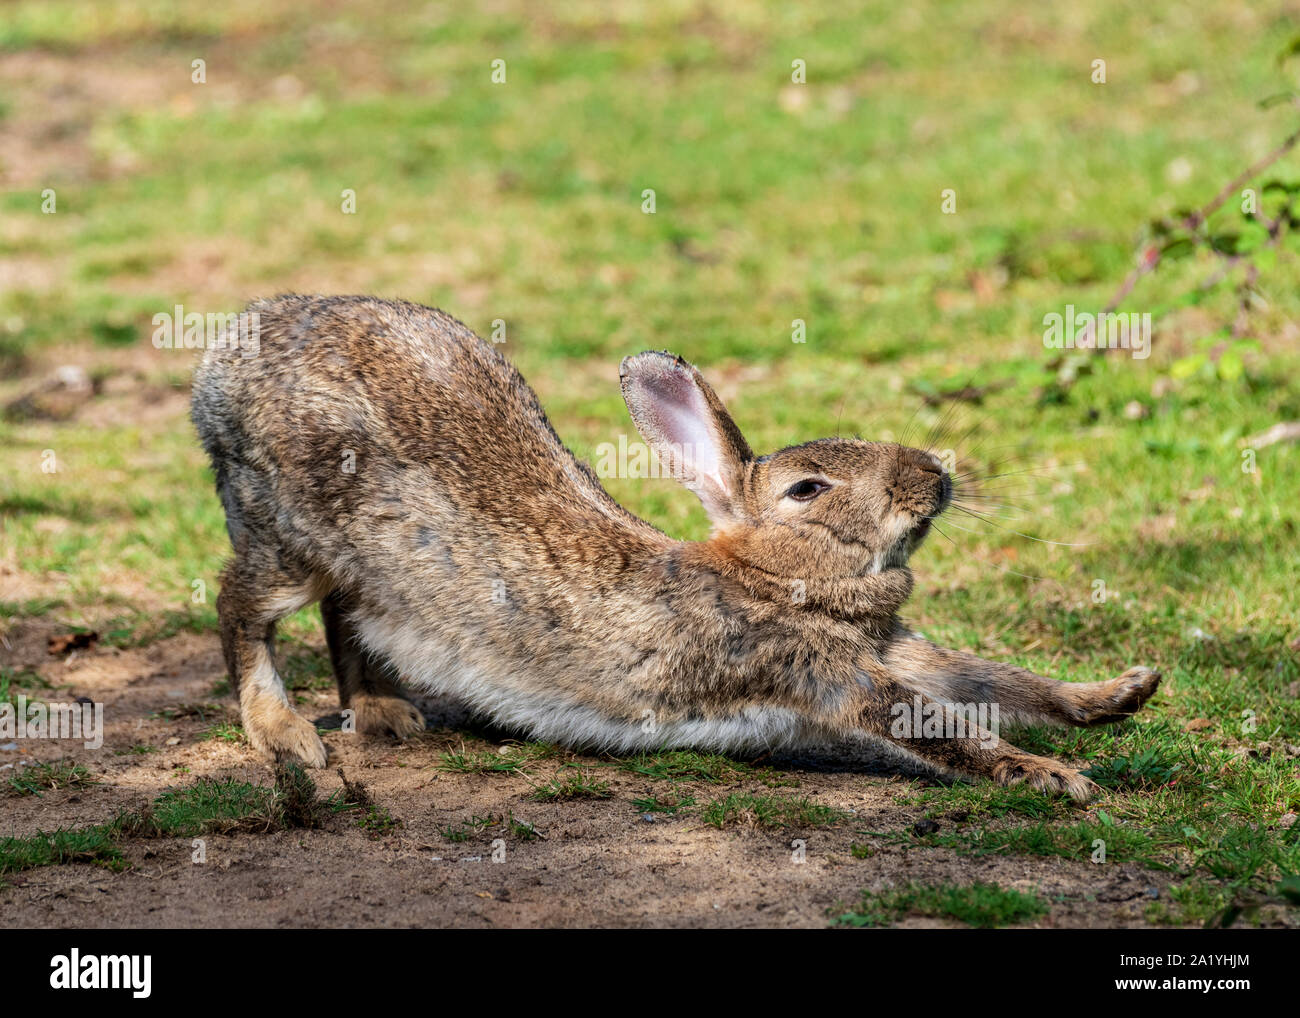 wild rabbit stretching with front paw raised Stock Photo